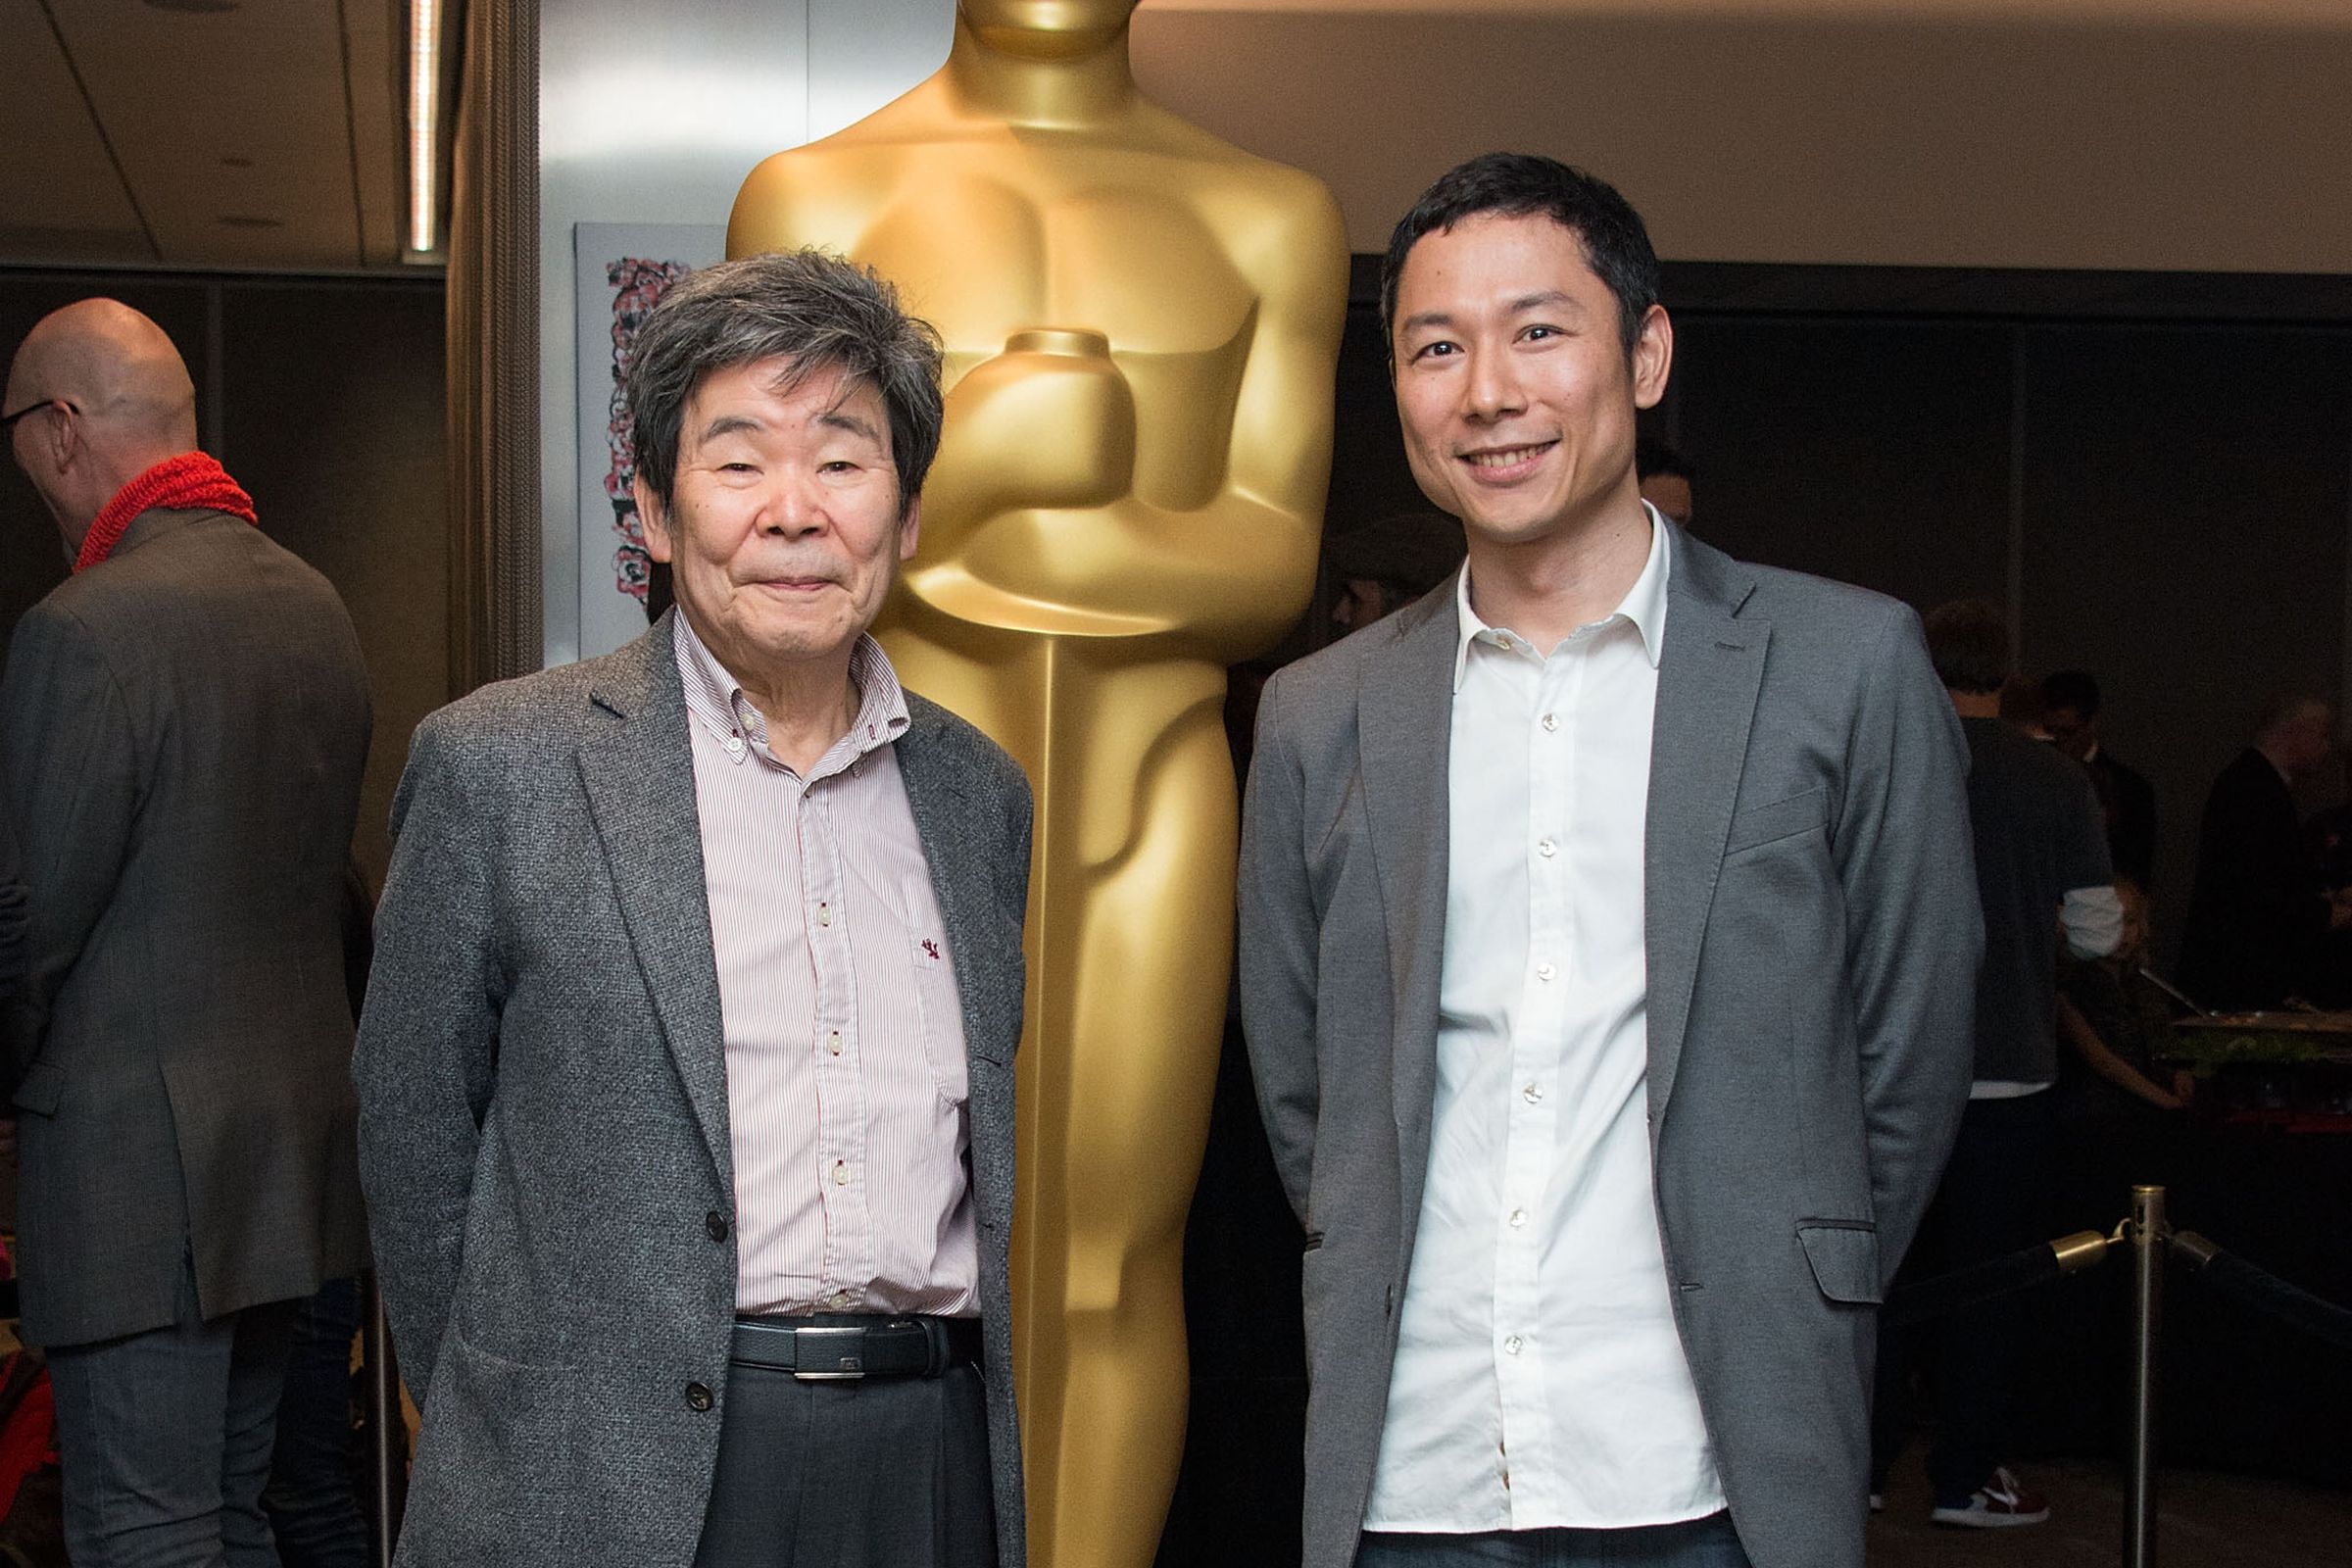 Isao Takahata (L) and Yoshiaki Nishimura attend the 87th Annual Academy Awards Oscar Week Celebrates Animated Features at Samuel Goldwyn Theater on February 19, 2015 in Beverly Hills, California.